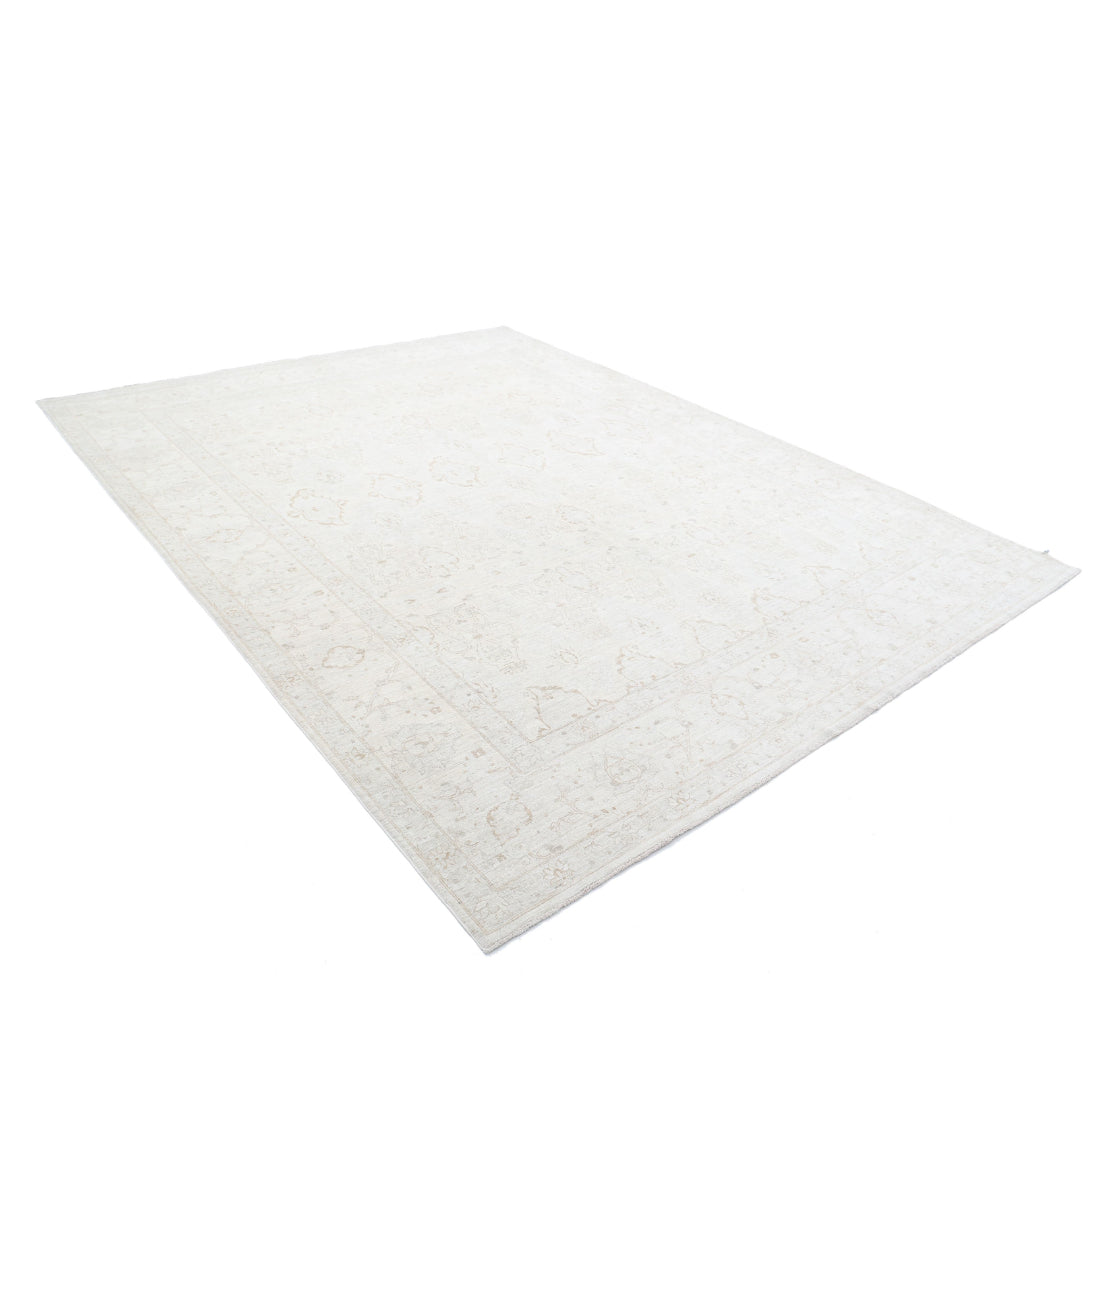 Serenity 8'10'' X 11'6'' Hand-Knotted Wool Rug 8'10'' x 11'6'' (265 X 345) / Ivory / Taupe